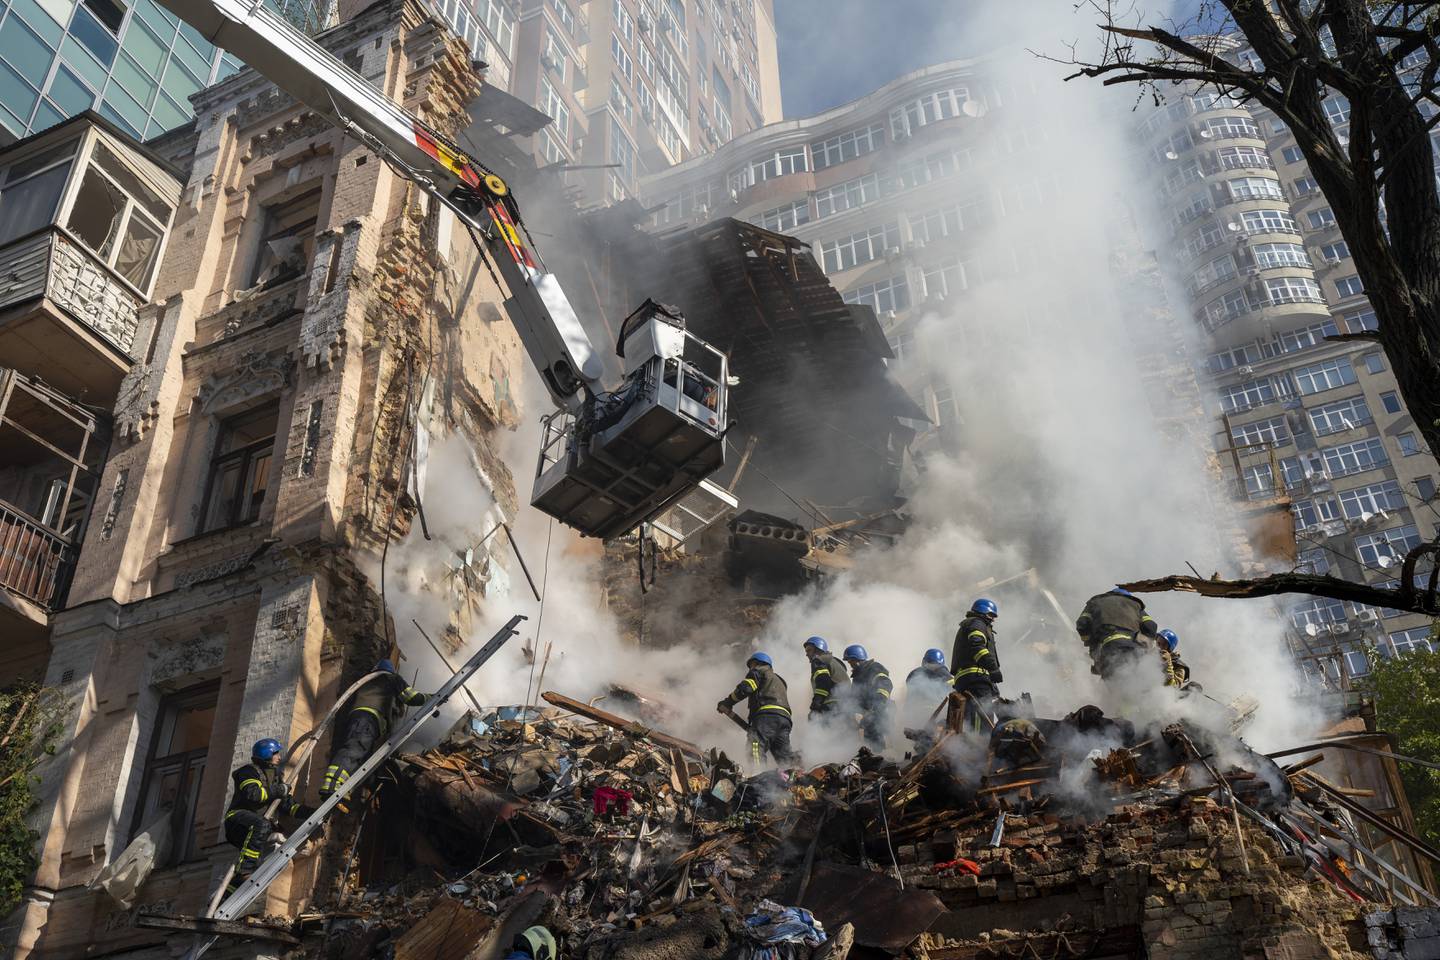 Firefighters work after a drone attack on buildings in Kyiv, Ukraine, Monday, Oct. 17, 2022.